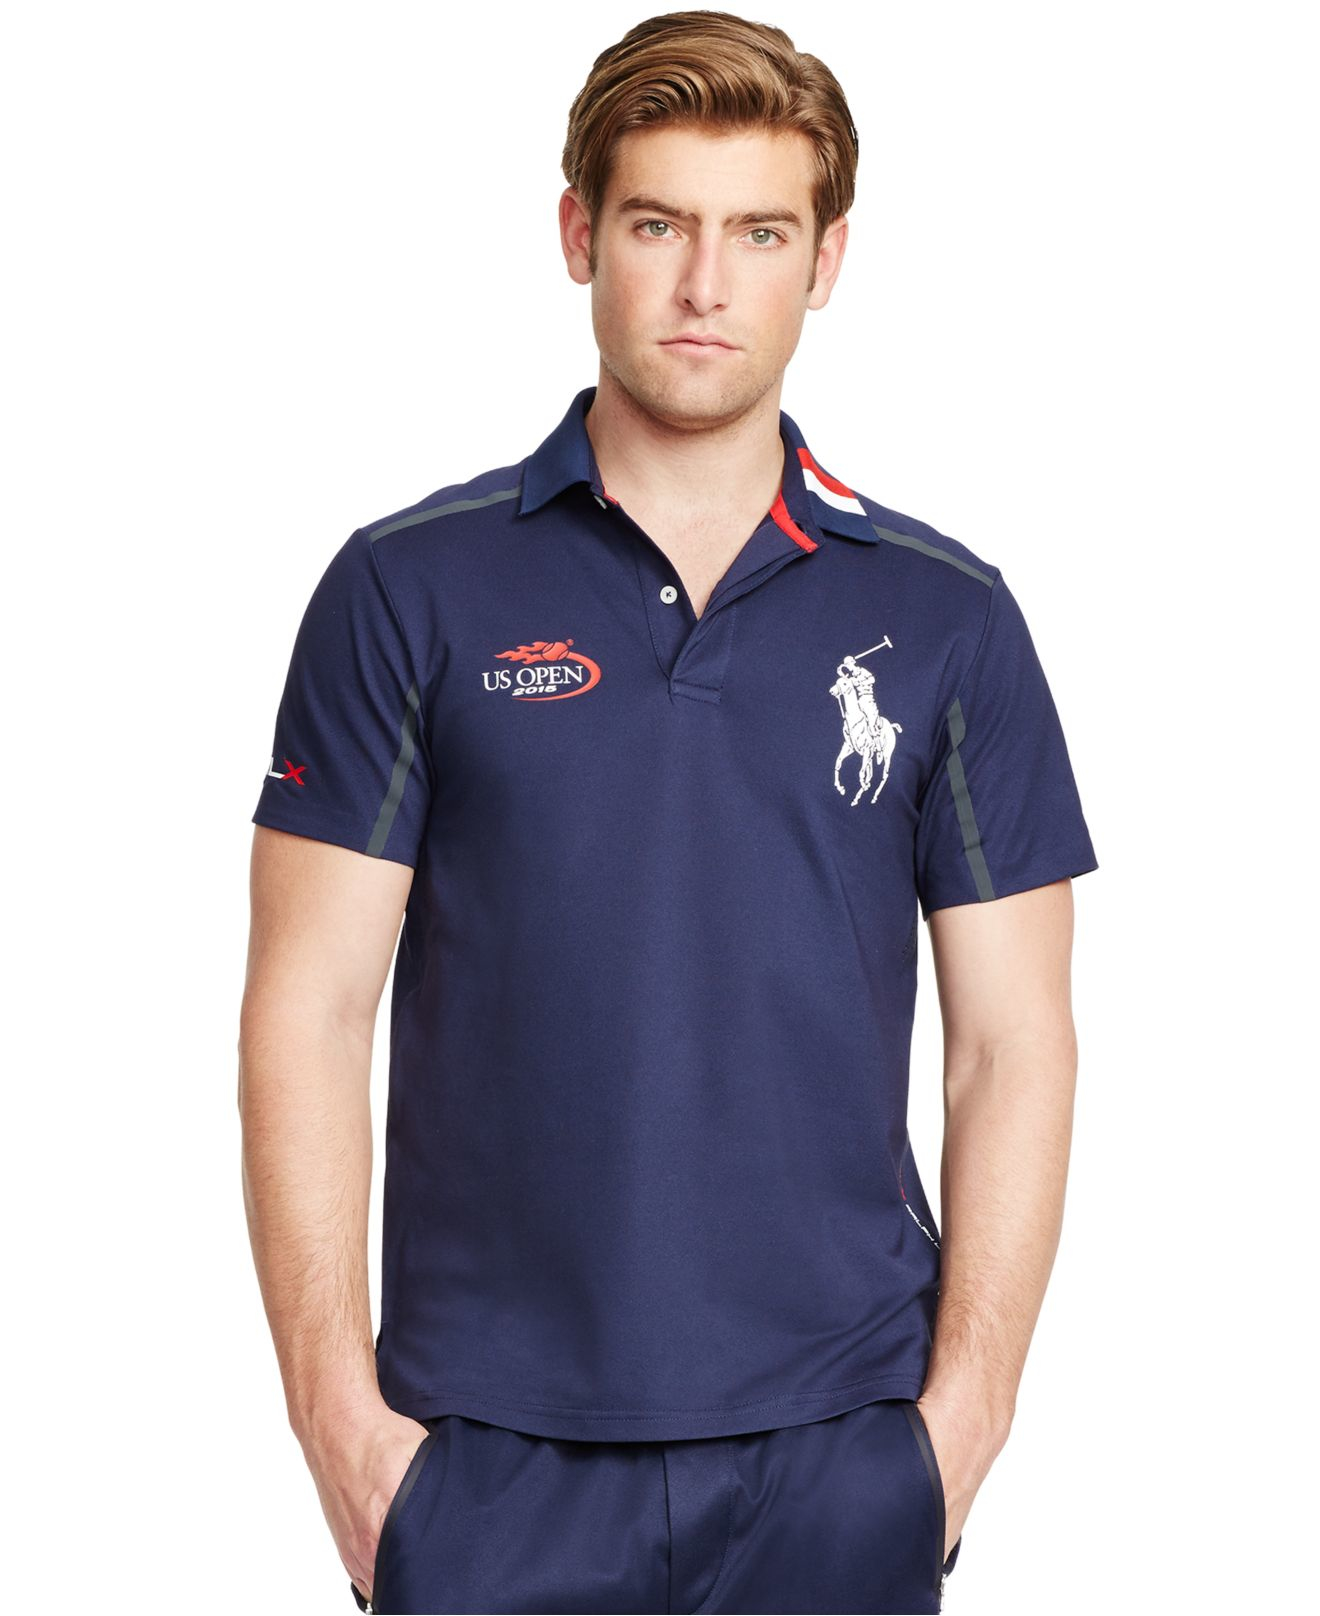 Us Open Polo Shirt - www.inf-inet.com